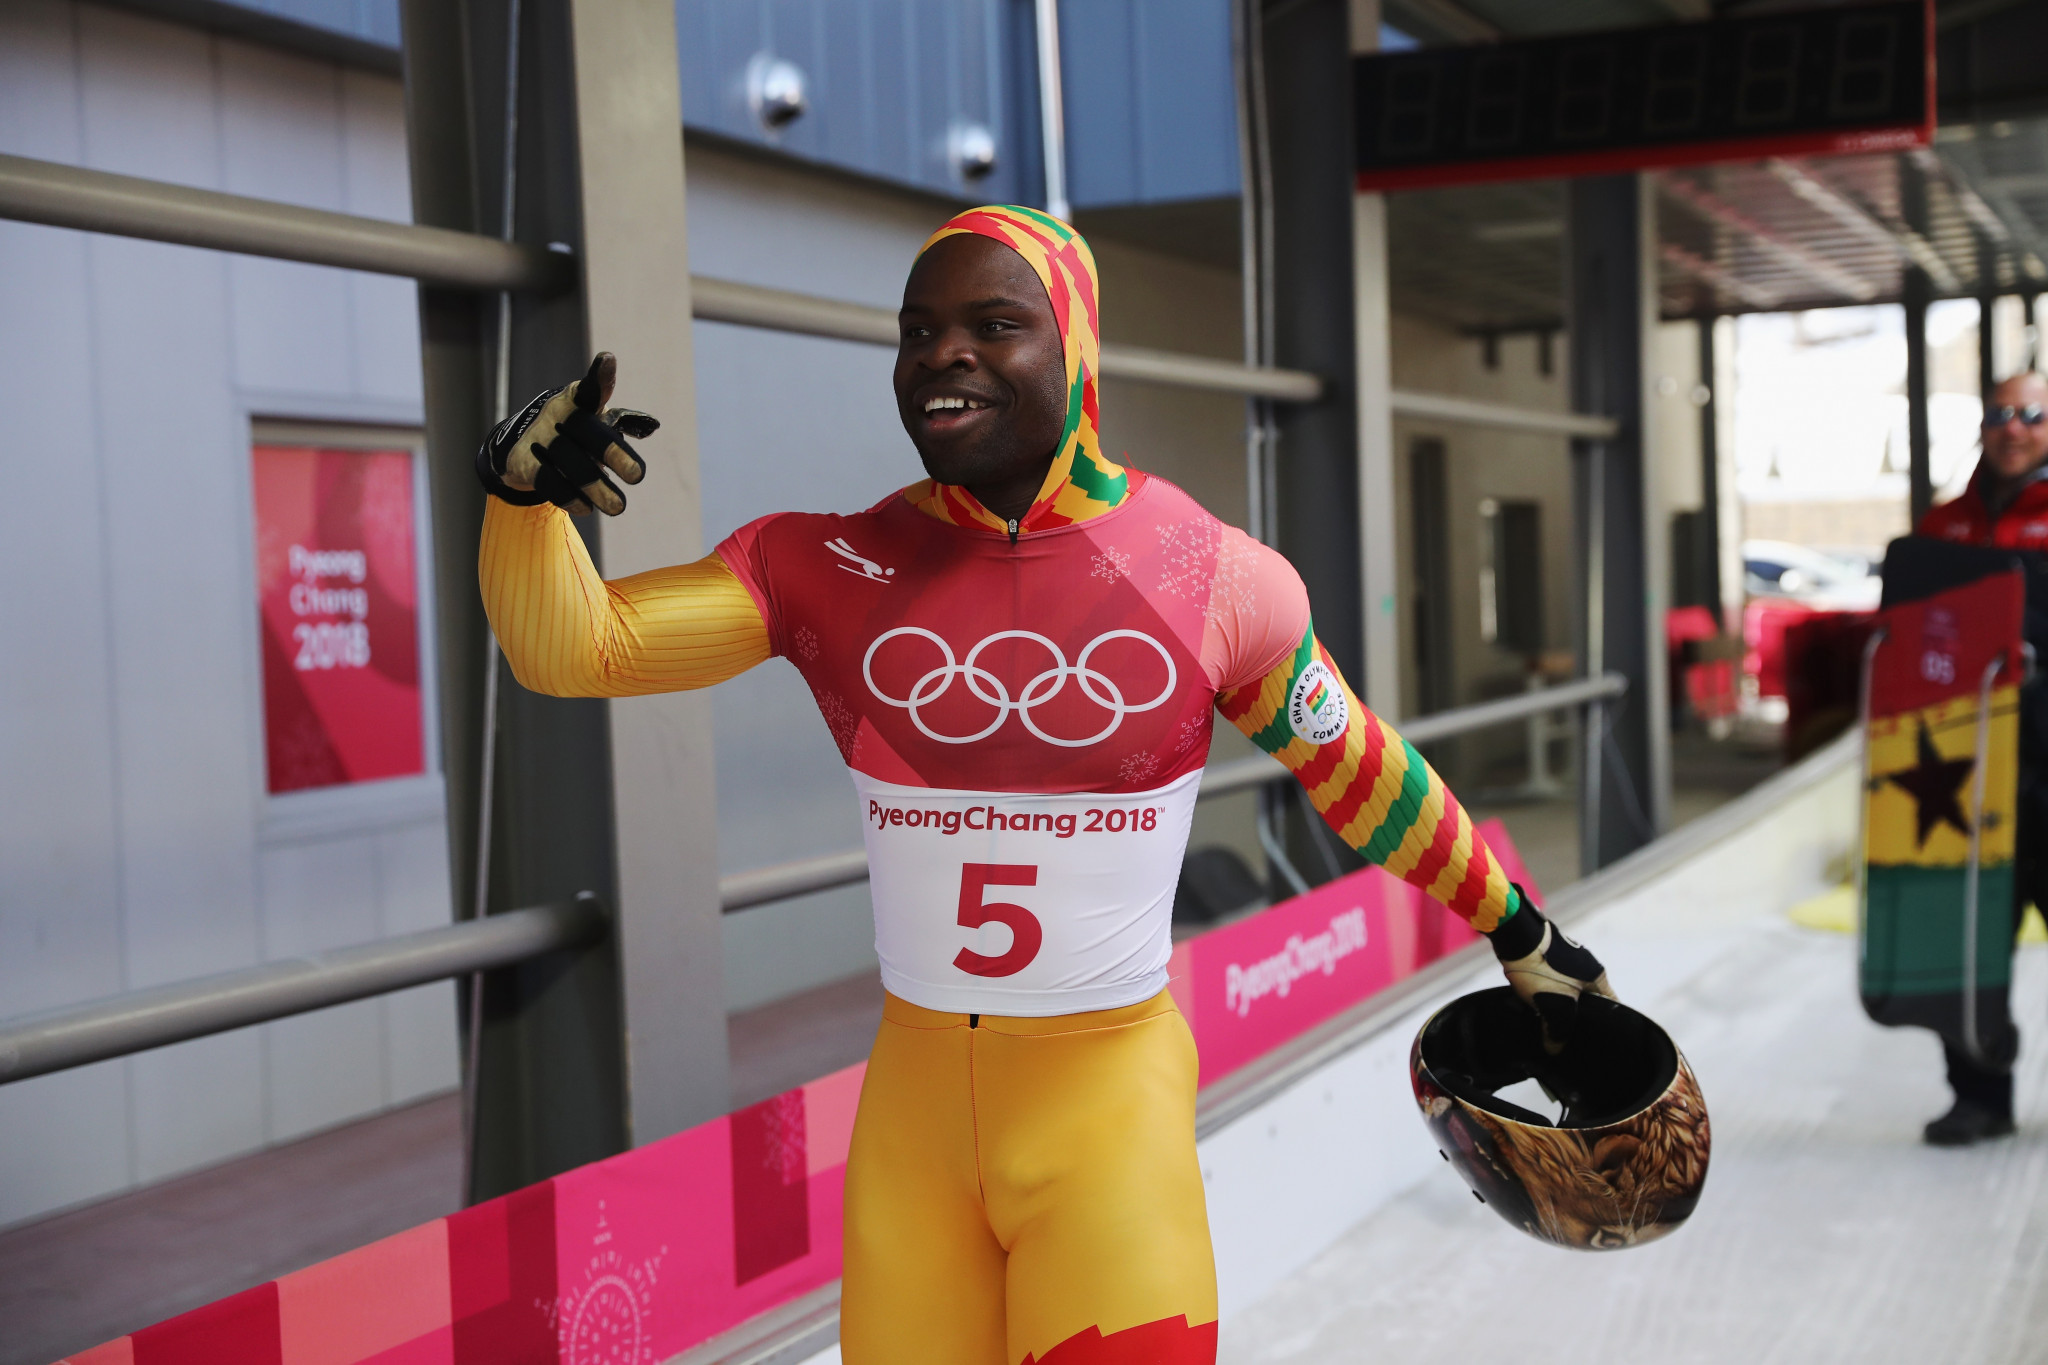 Akwasi Frimpong says he feels like Africans "don’t belong" at the Winter Olympics ©Getty Images